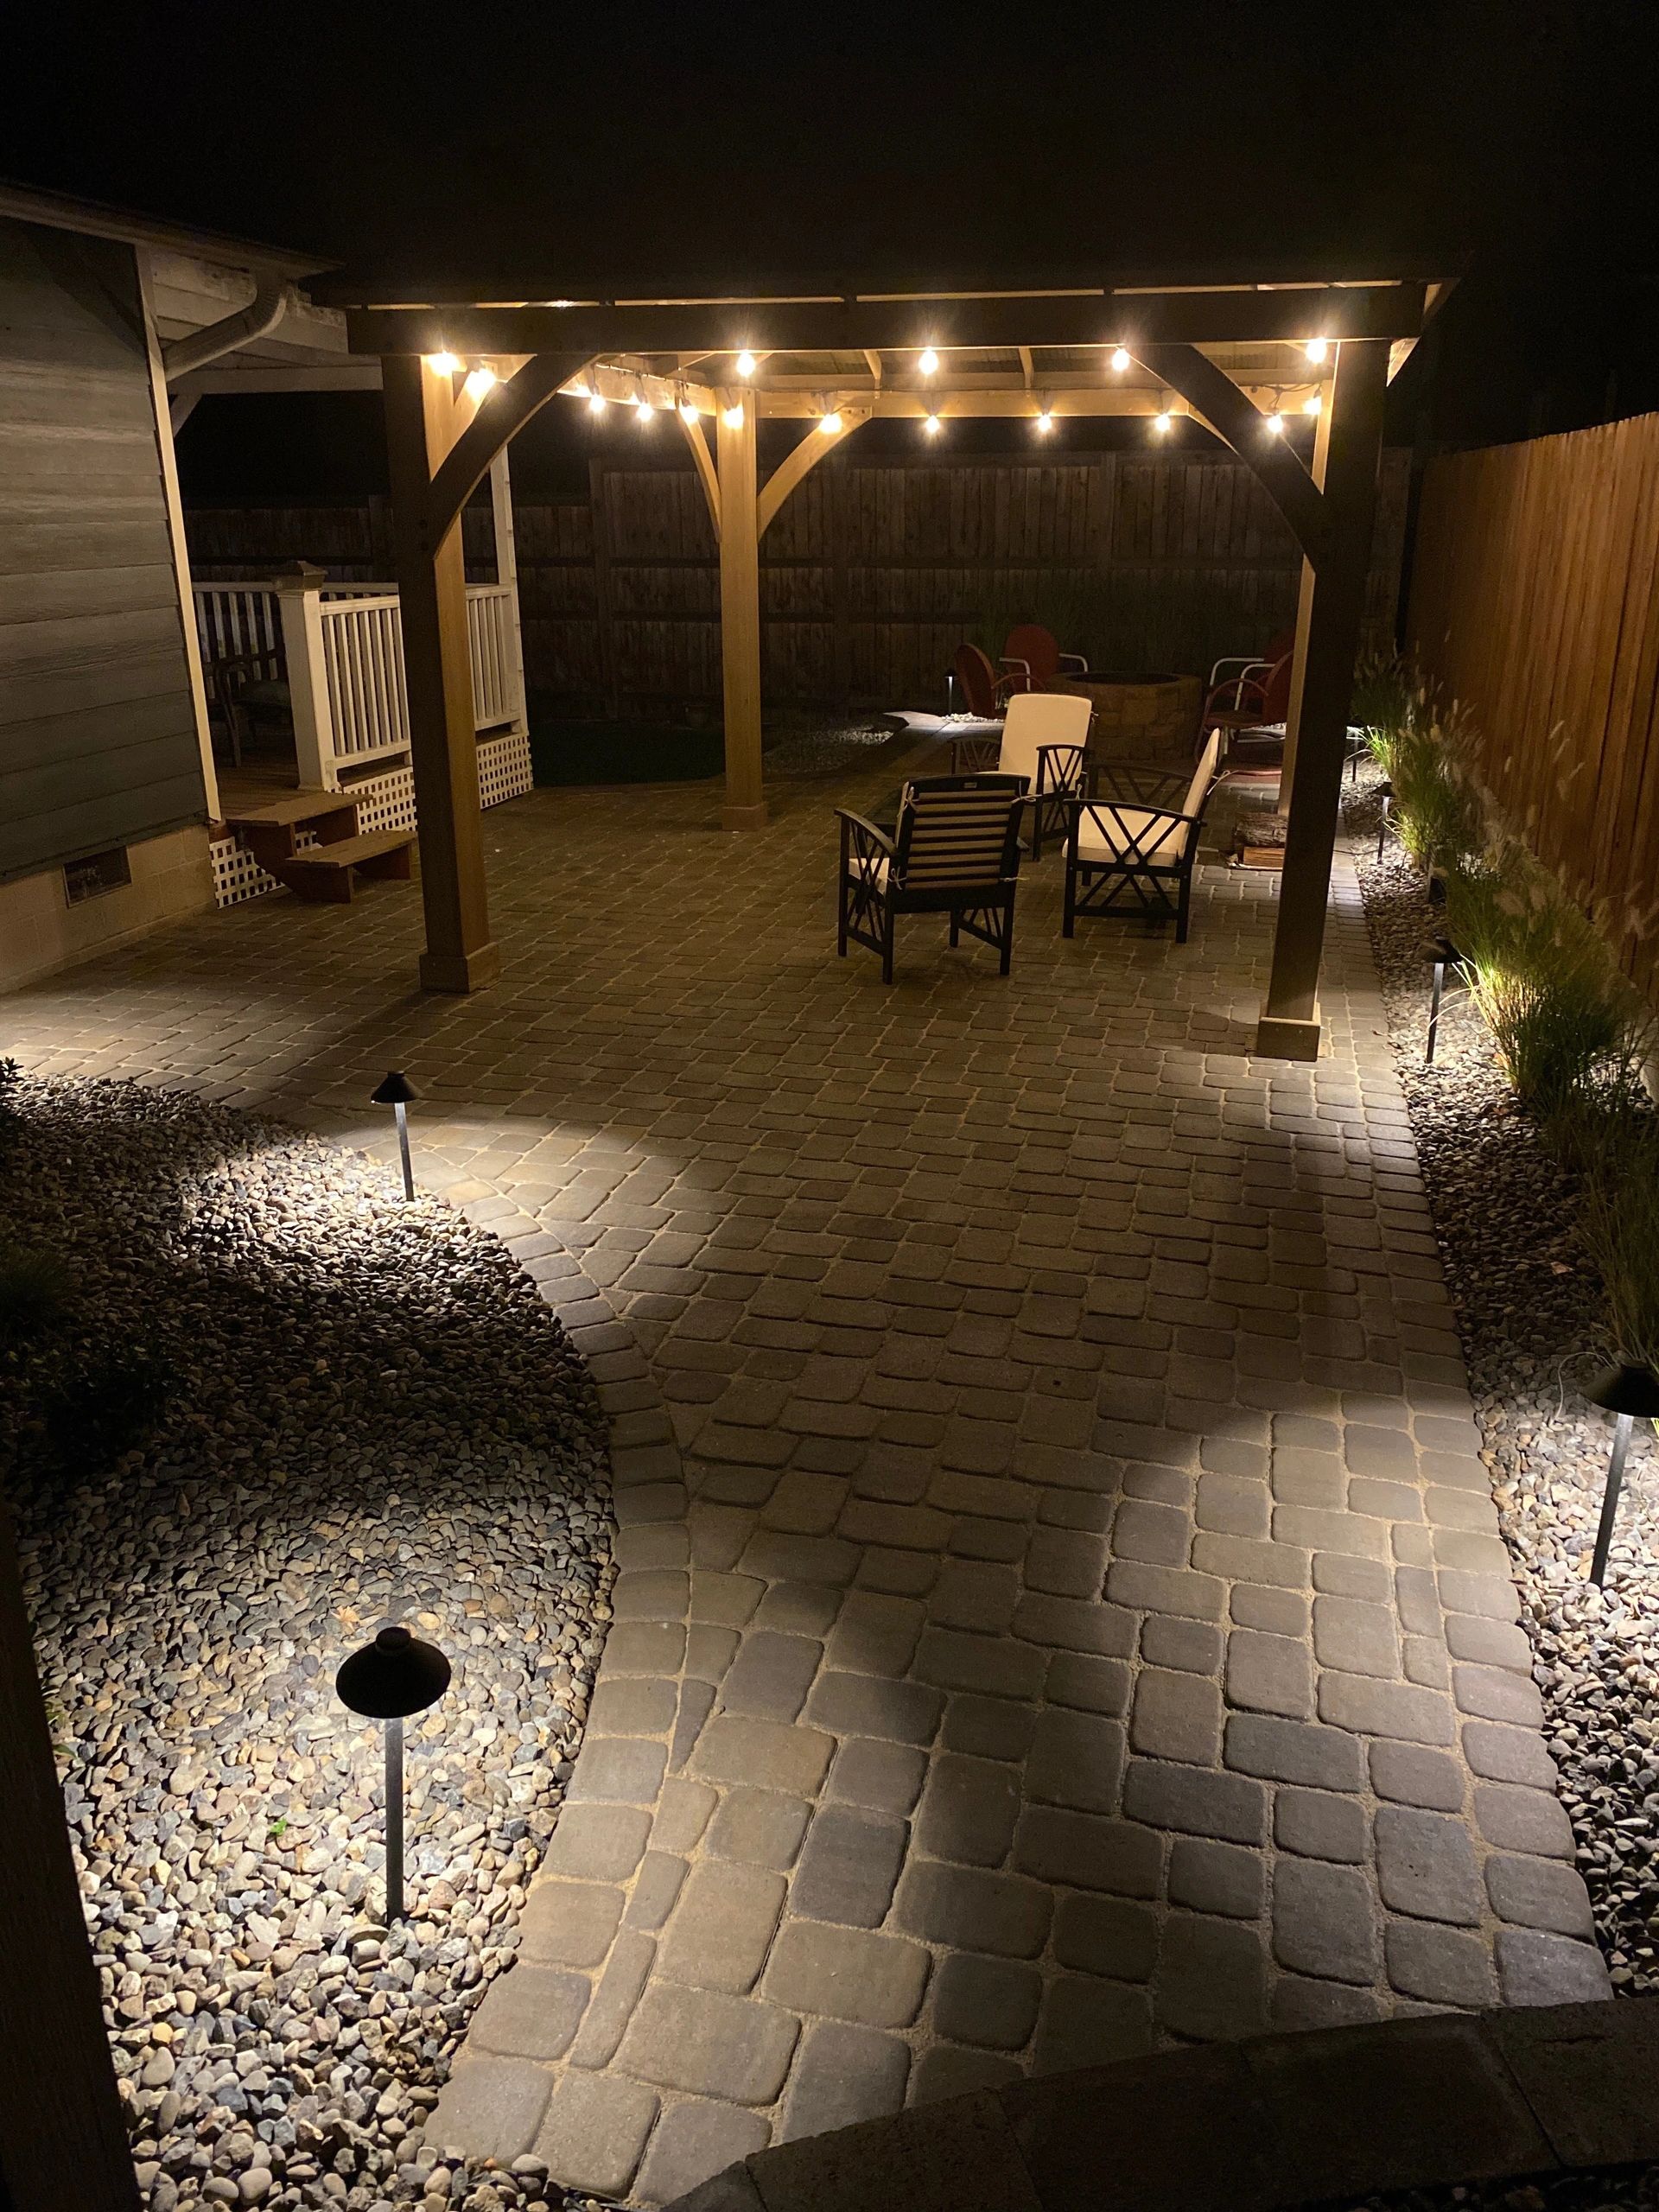 Need help brightening up your outdoor living space? We have top of the line landscaping lighting to 